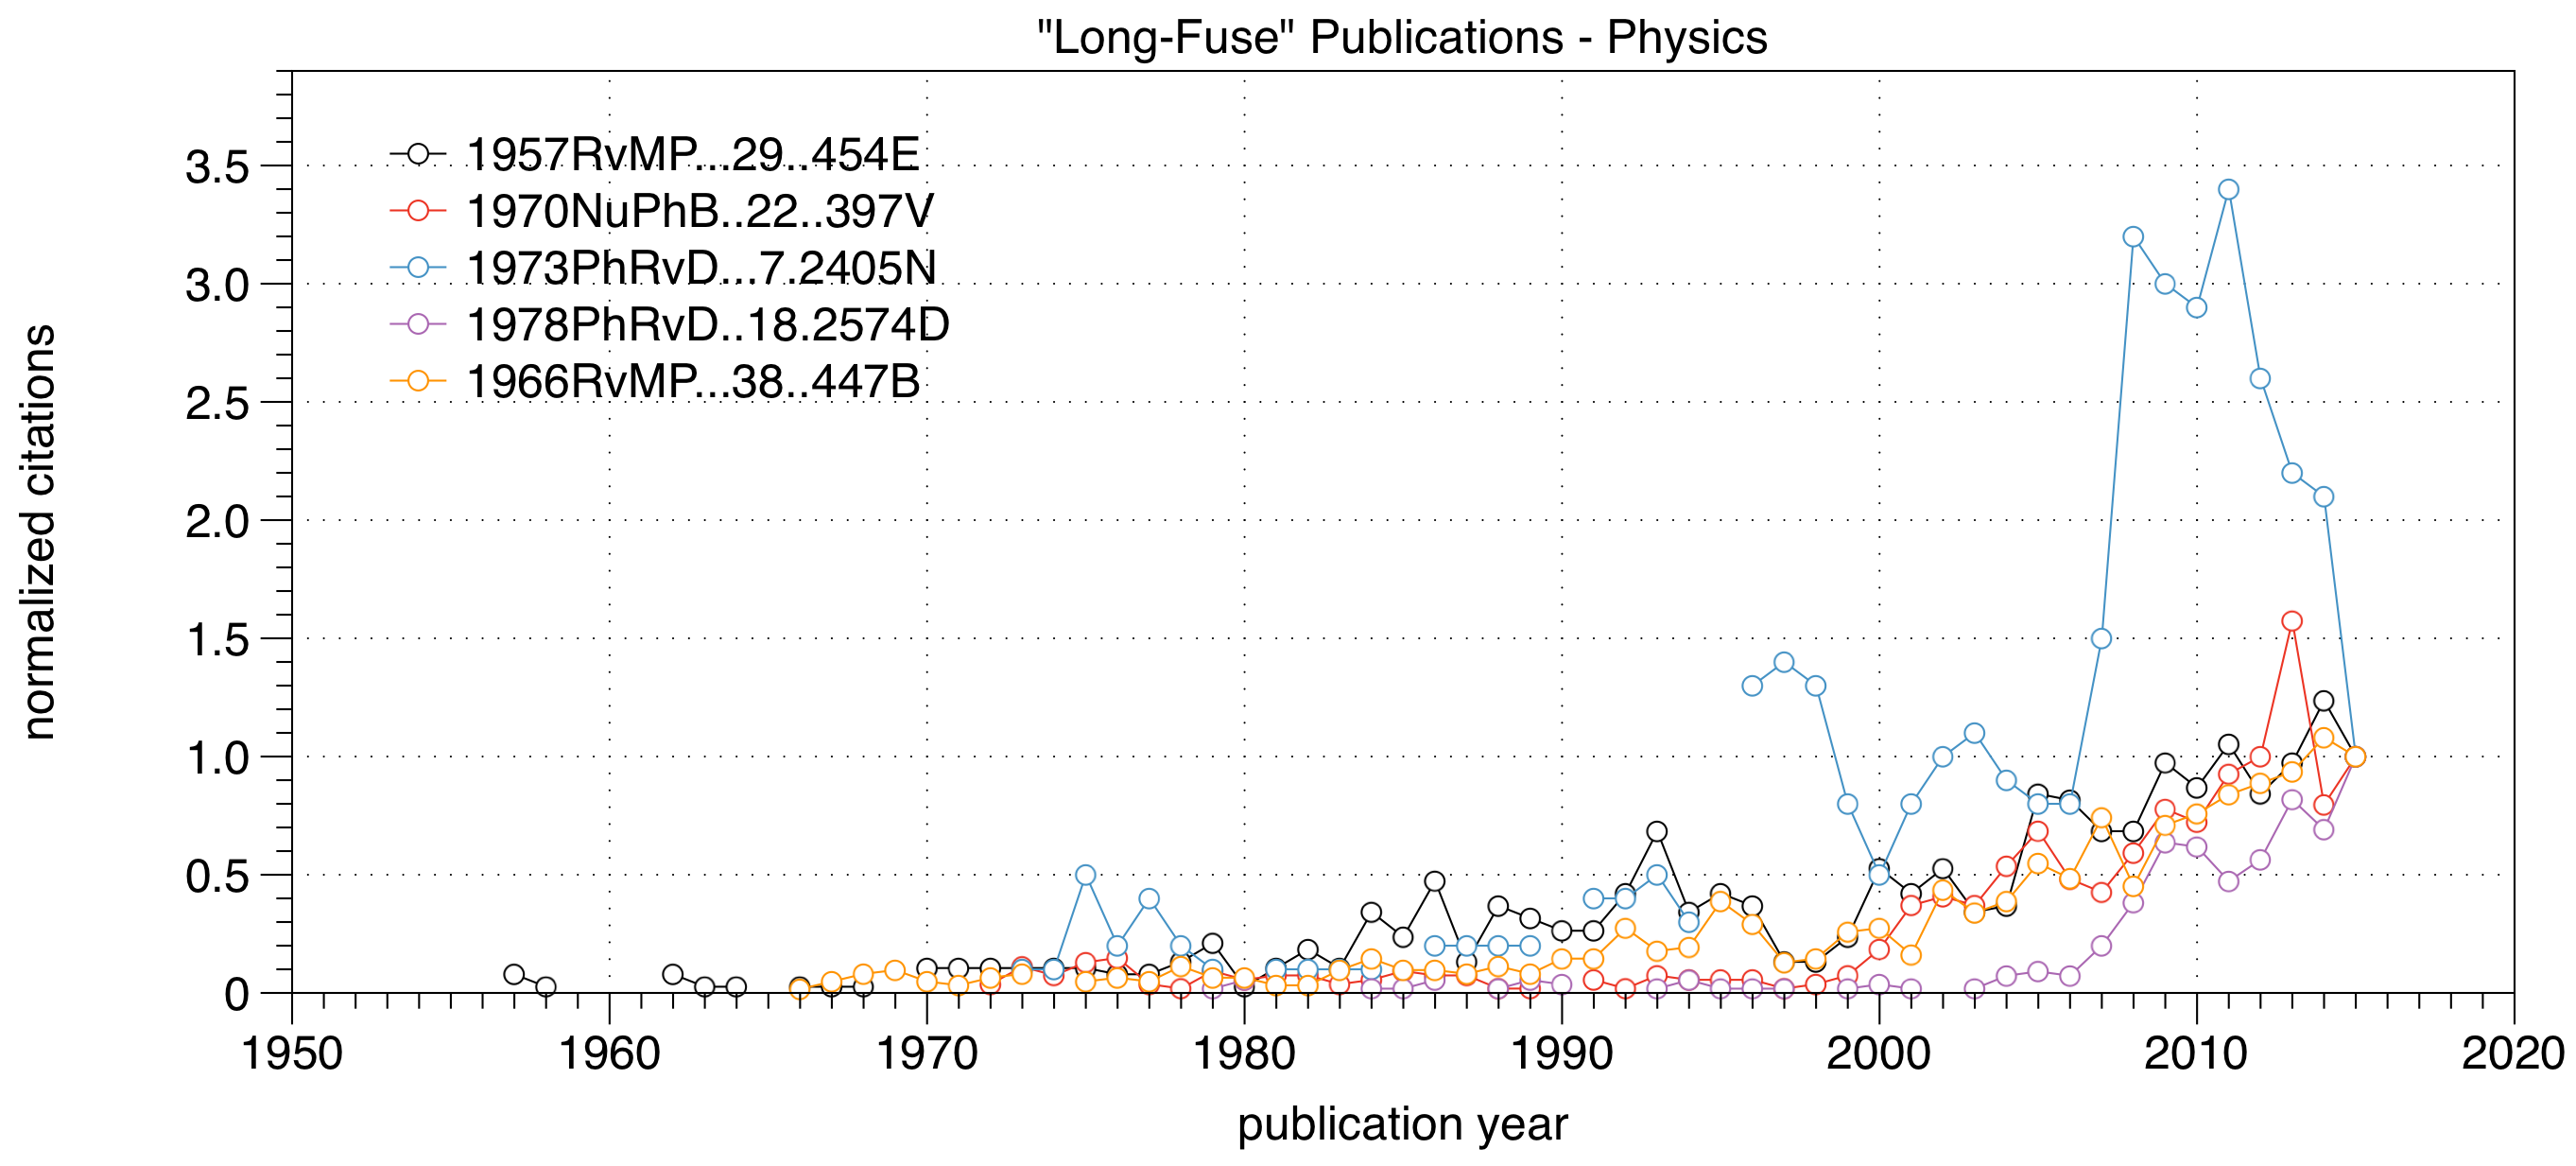 Normalized citations for 5 long-fuse physics papers